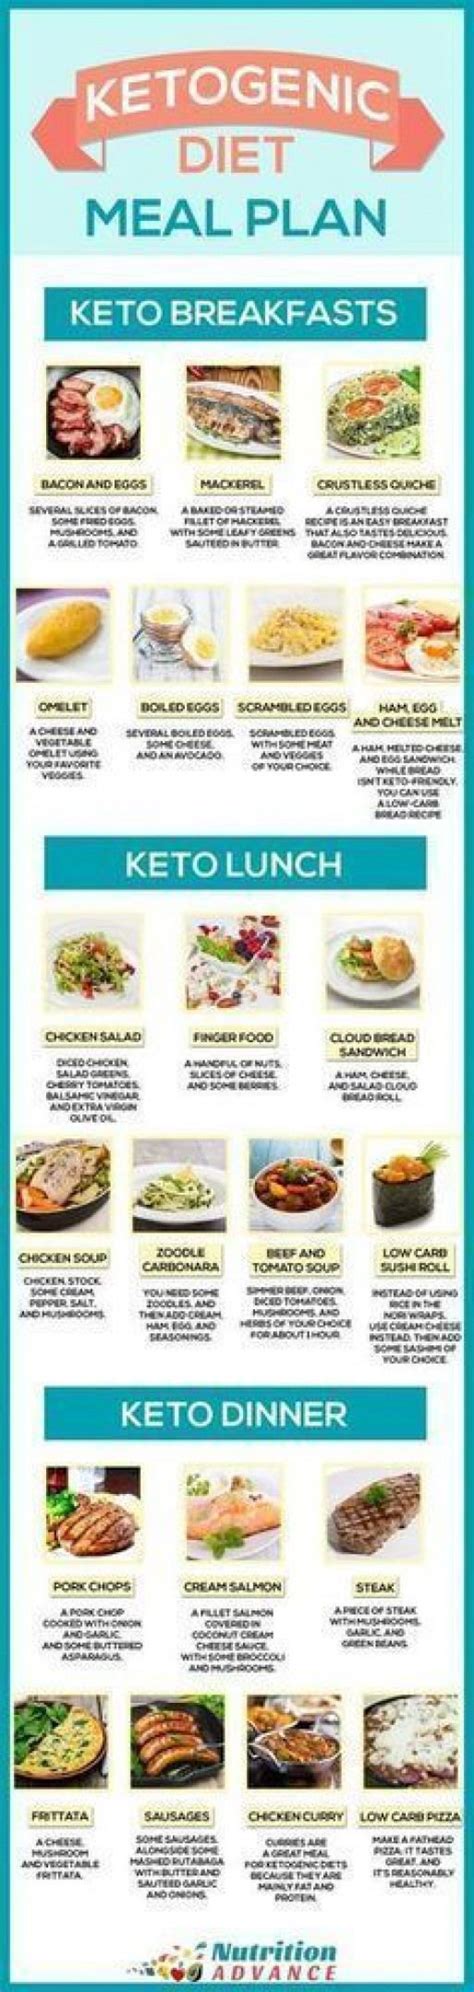 Ketogenic Diet Meal Plan For 7 Days This Infographic Shows Some Ideas